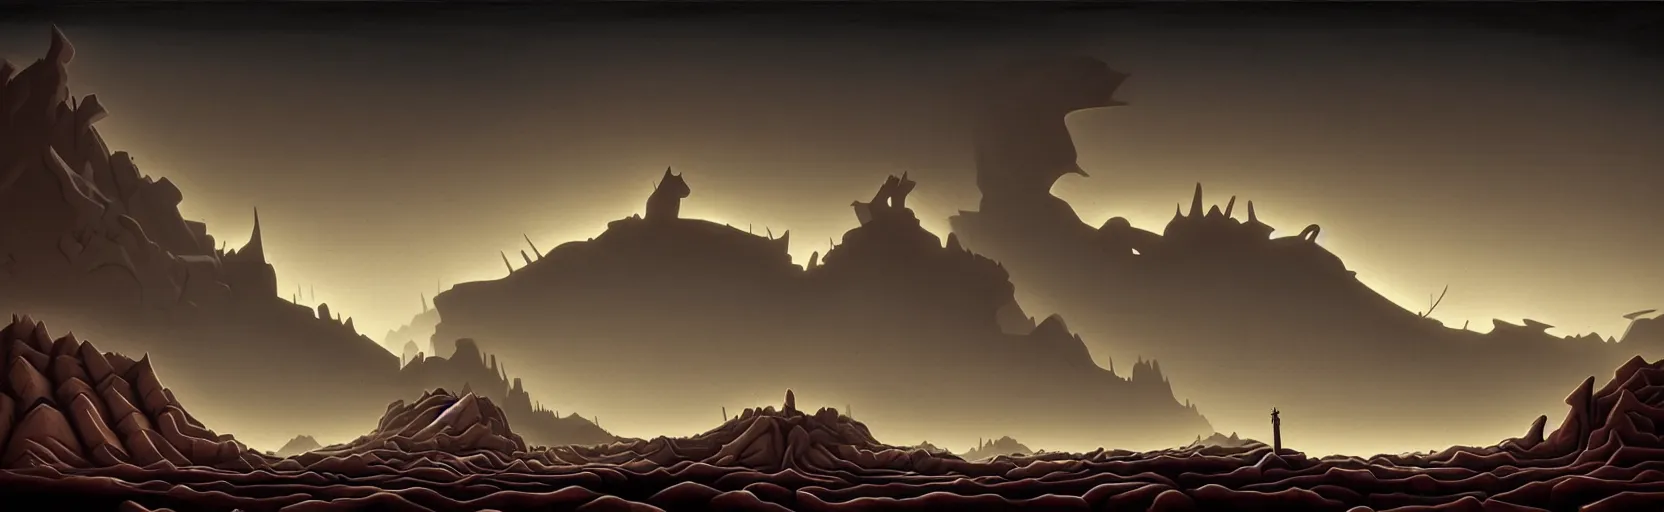 Prompt: uncanny wasteland landscape from the depths of a vast wasteland in the collective unconscious, dramatic lighting, surreal dark 1 9 3 0 s fleischer cartoon characters, surreal painting by ronny khalil